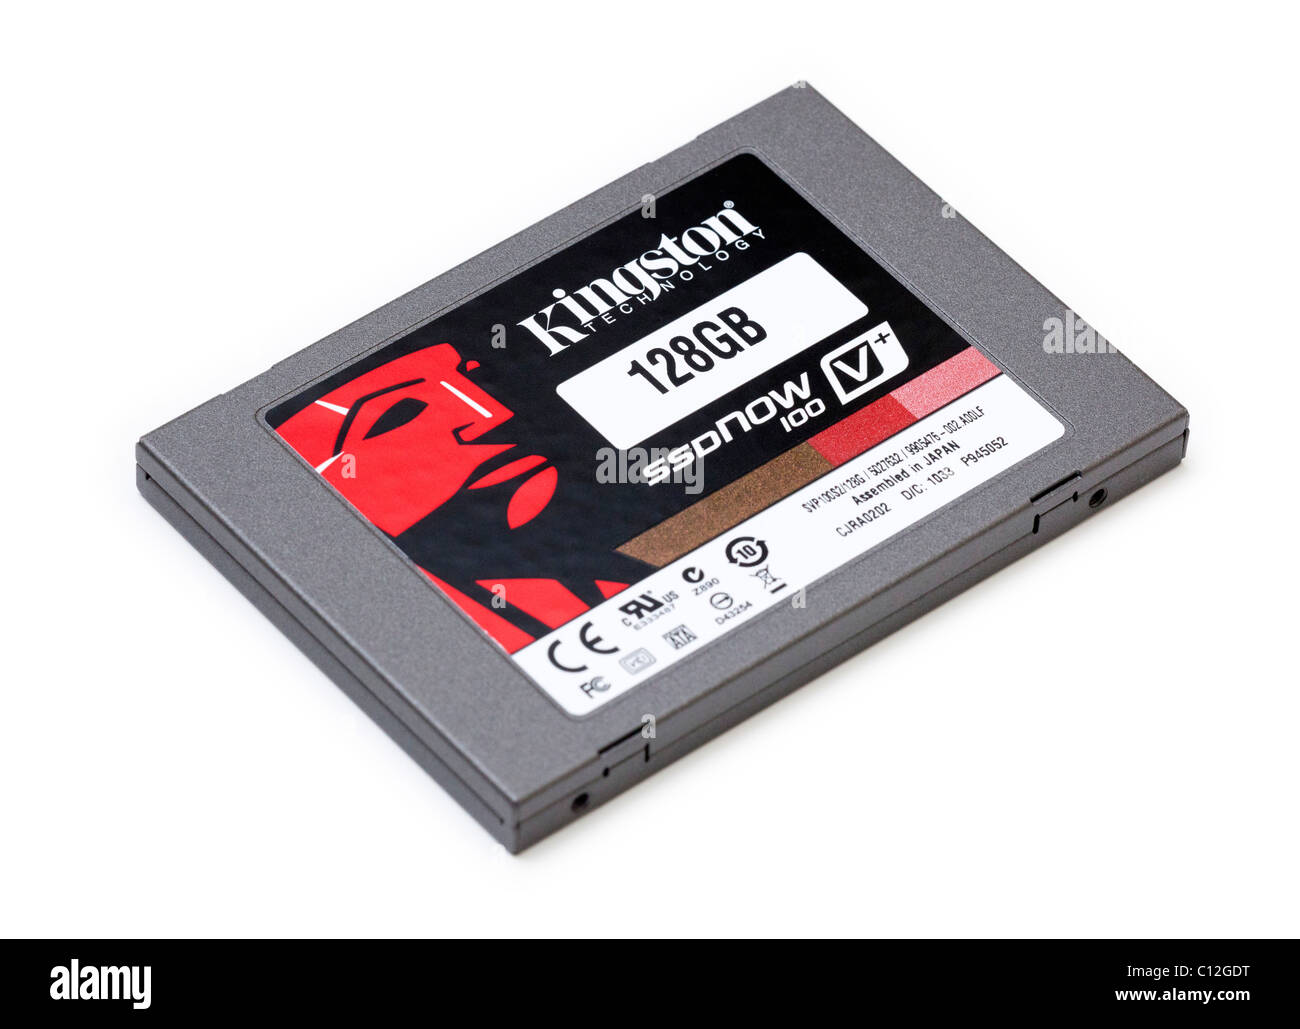 Kingston 128GB solid state drive Stock Photo